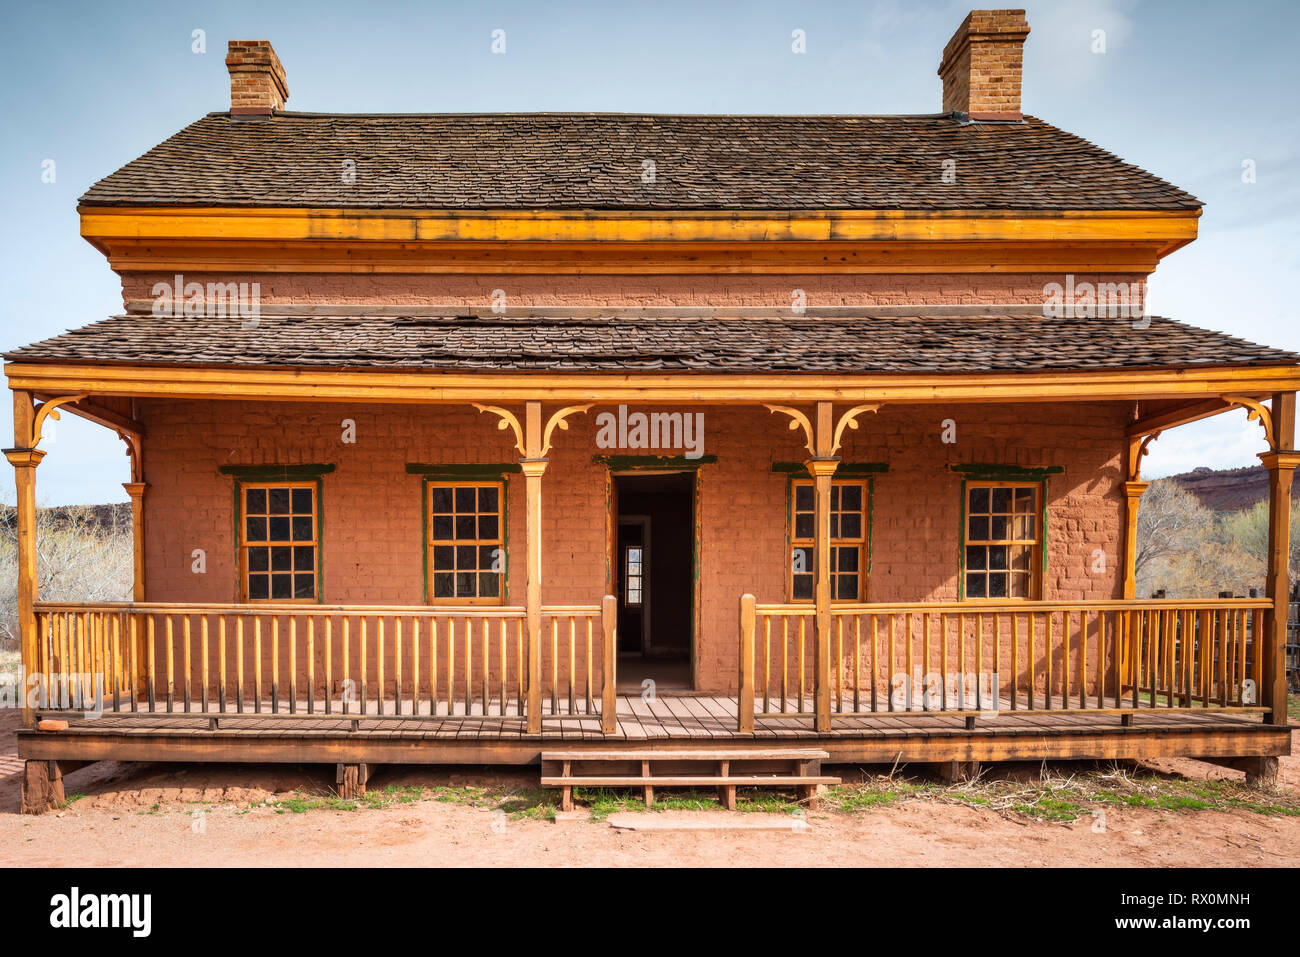 Alonzo Russell adobe house (featured in the film 'Butch Cassidy and the Sundance Kid'), Grafton ghost town, Utah USA Stock Photo